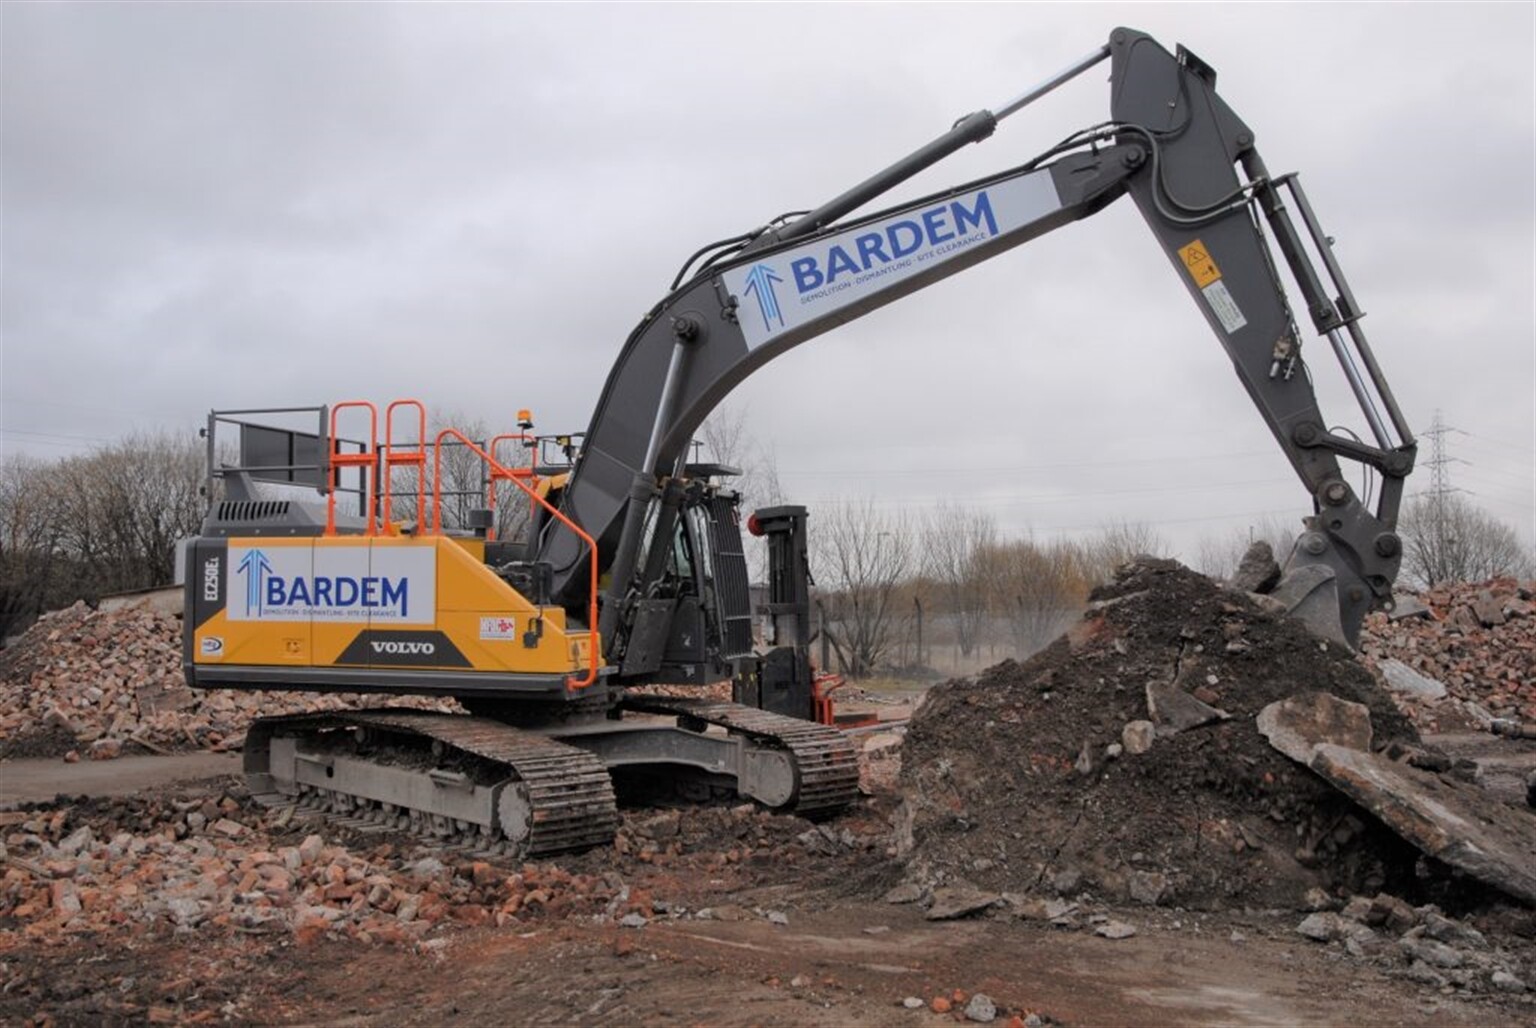 Bardem Ltd Gears Up with New Flagship Excavator